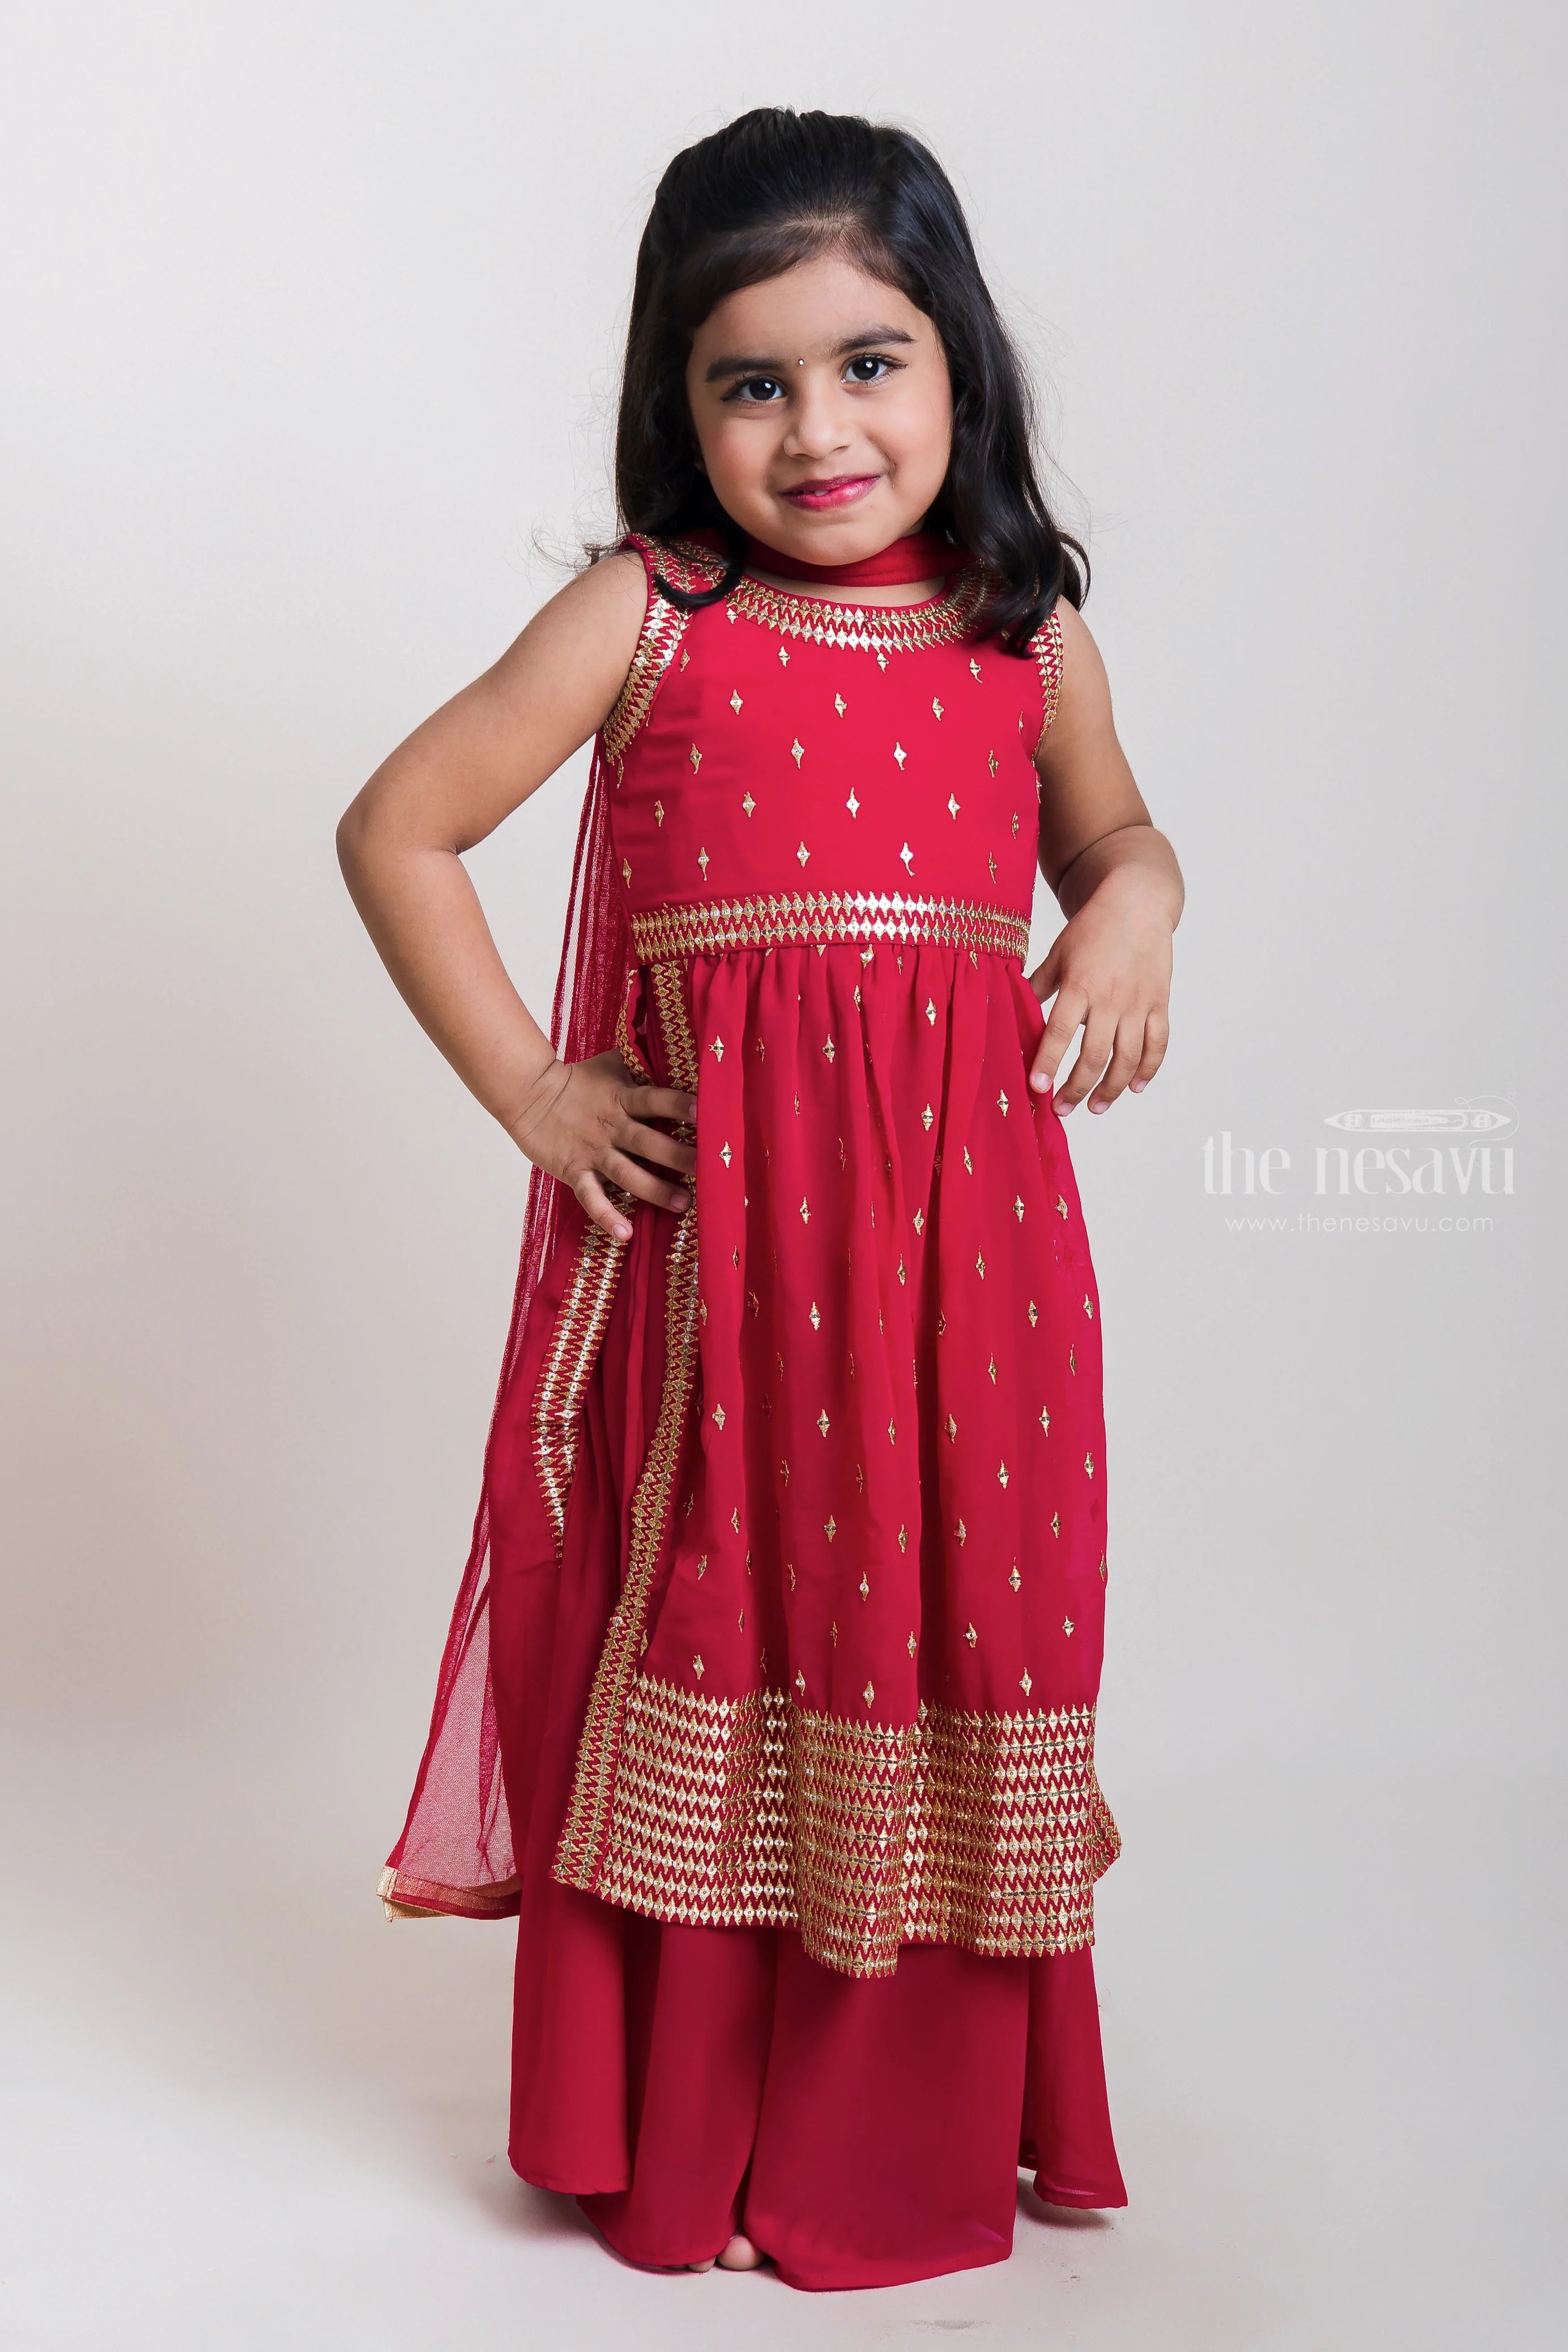 nesavu designer red kurti suit with palazzo pants for little girls girls sharara plazo set 16 1y red thenesavu gps112a 16 dynamic red kurti and palazzo pants for girls best collection